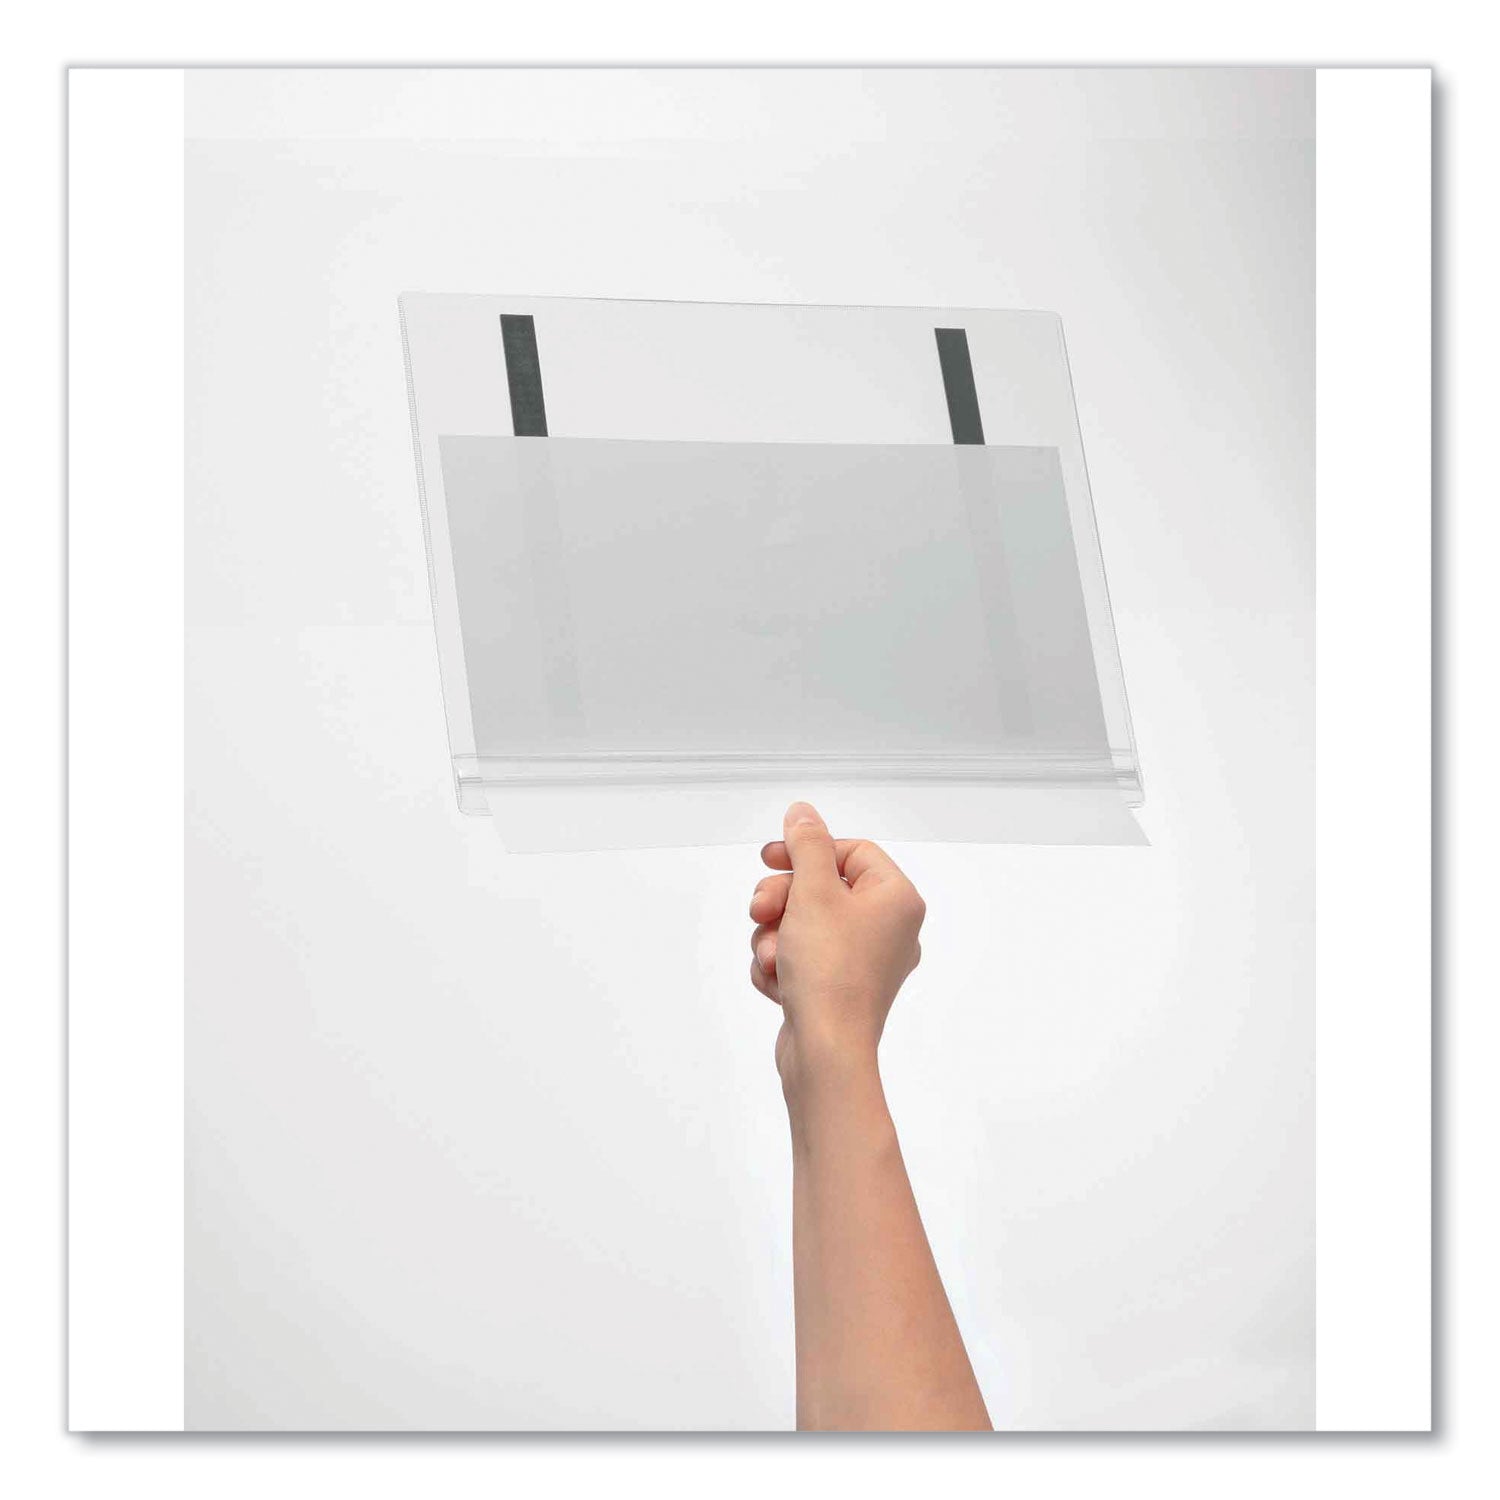 magnetic-water-resistant-sign-holder-85-x-11-clear-frame-5-pack_dbl501819 - 2